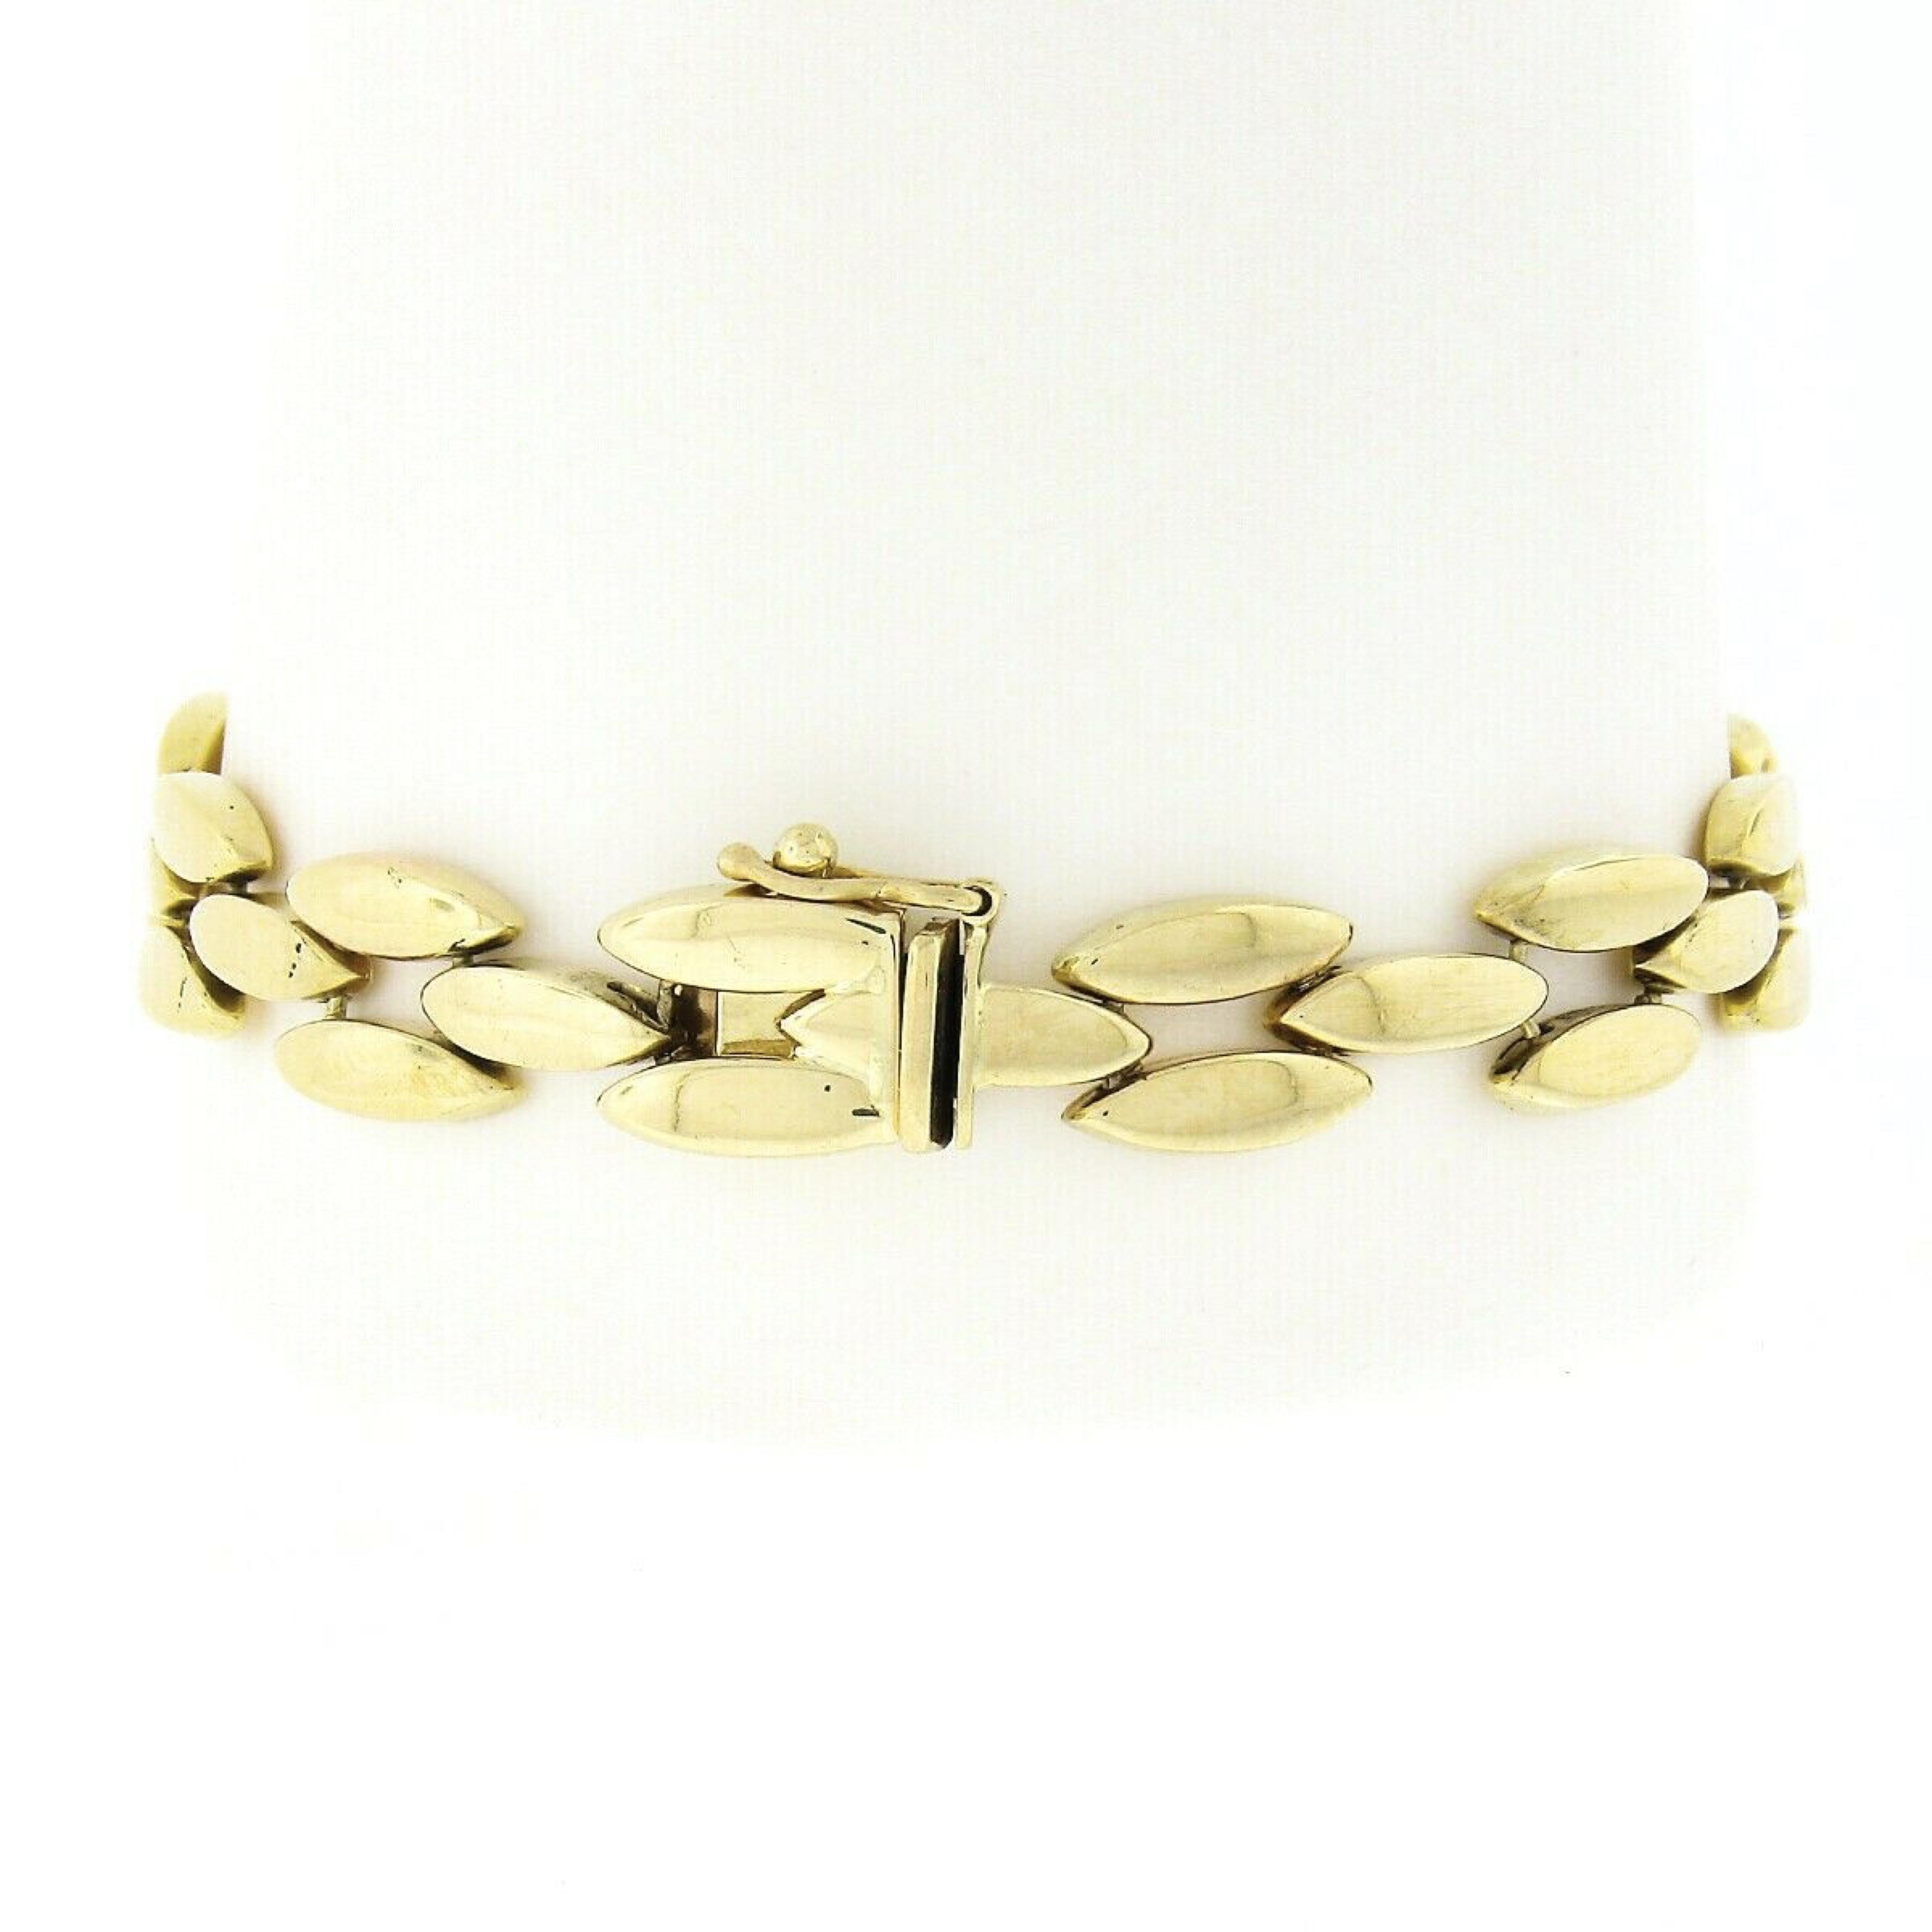 You are looking at an absolutely gorgeous Tiffany & Co. bracelet crafted in solid 14k yellow gold. The bracelet measures approximately 10mm wide and features three rows of panther links that have a nice high-polished finish throughout granting an a